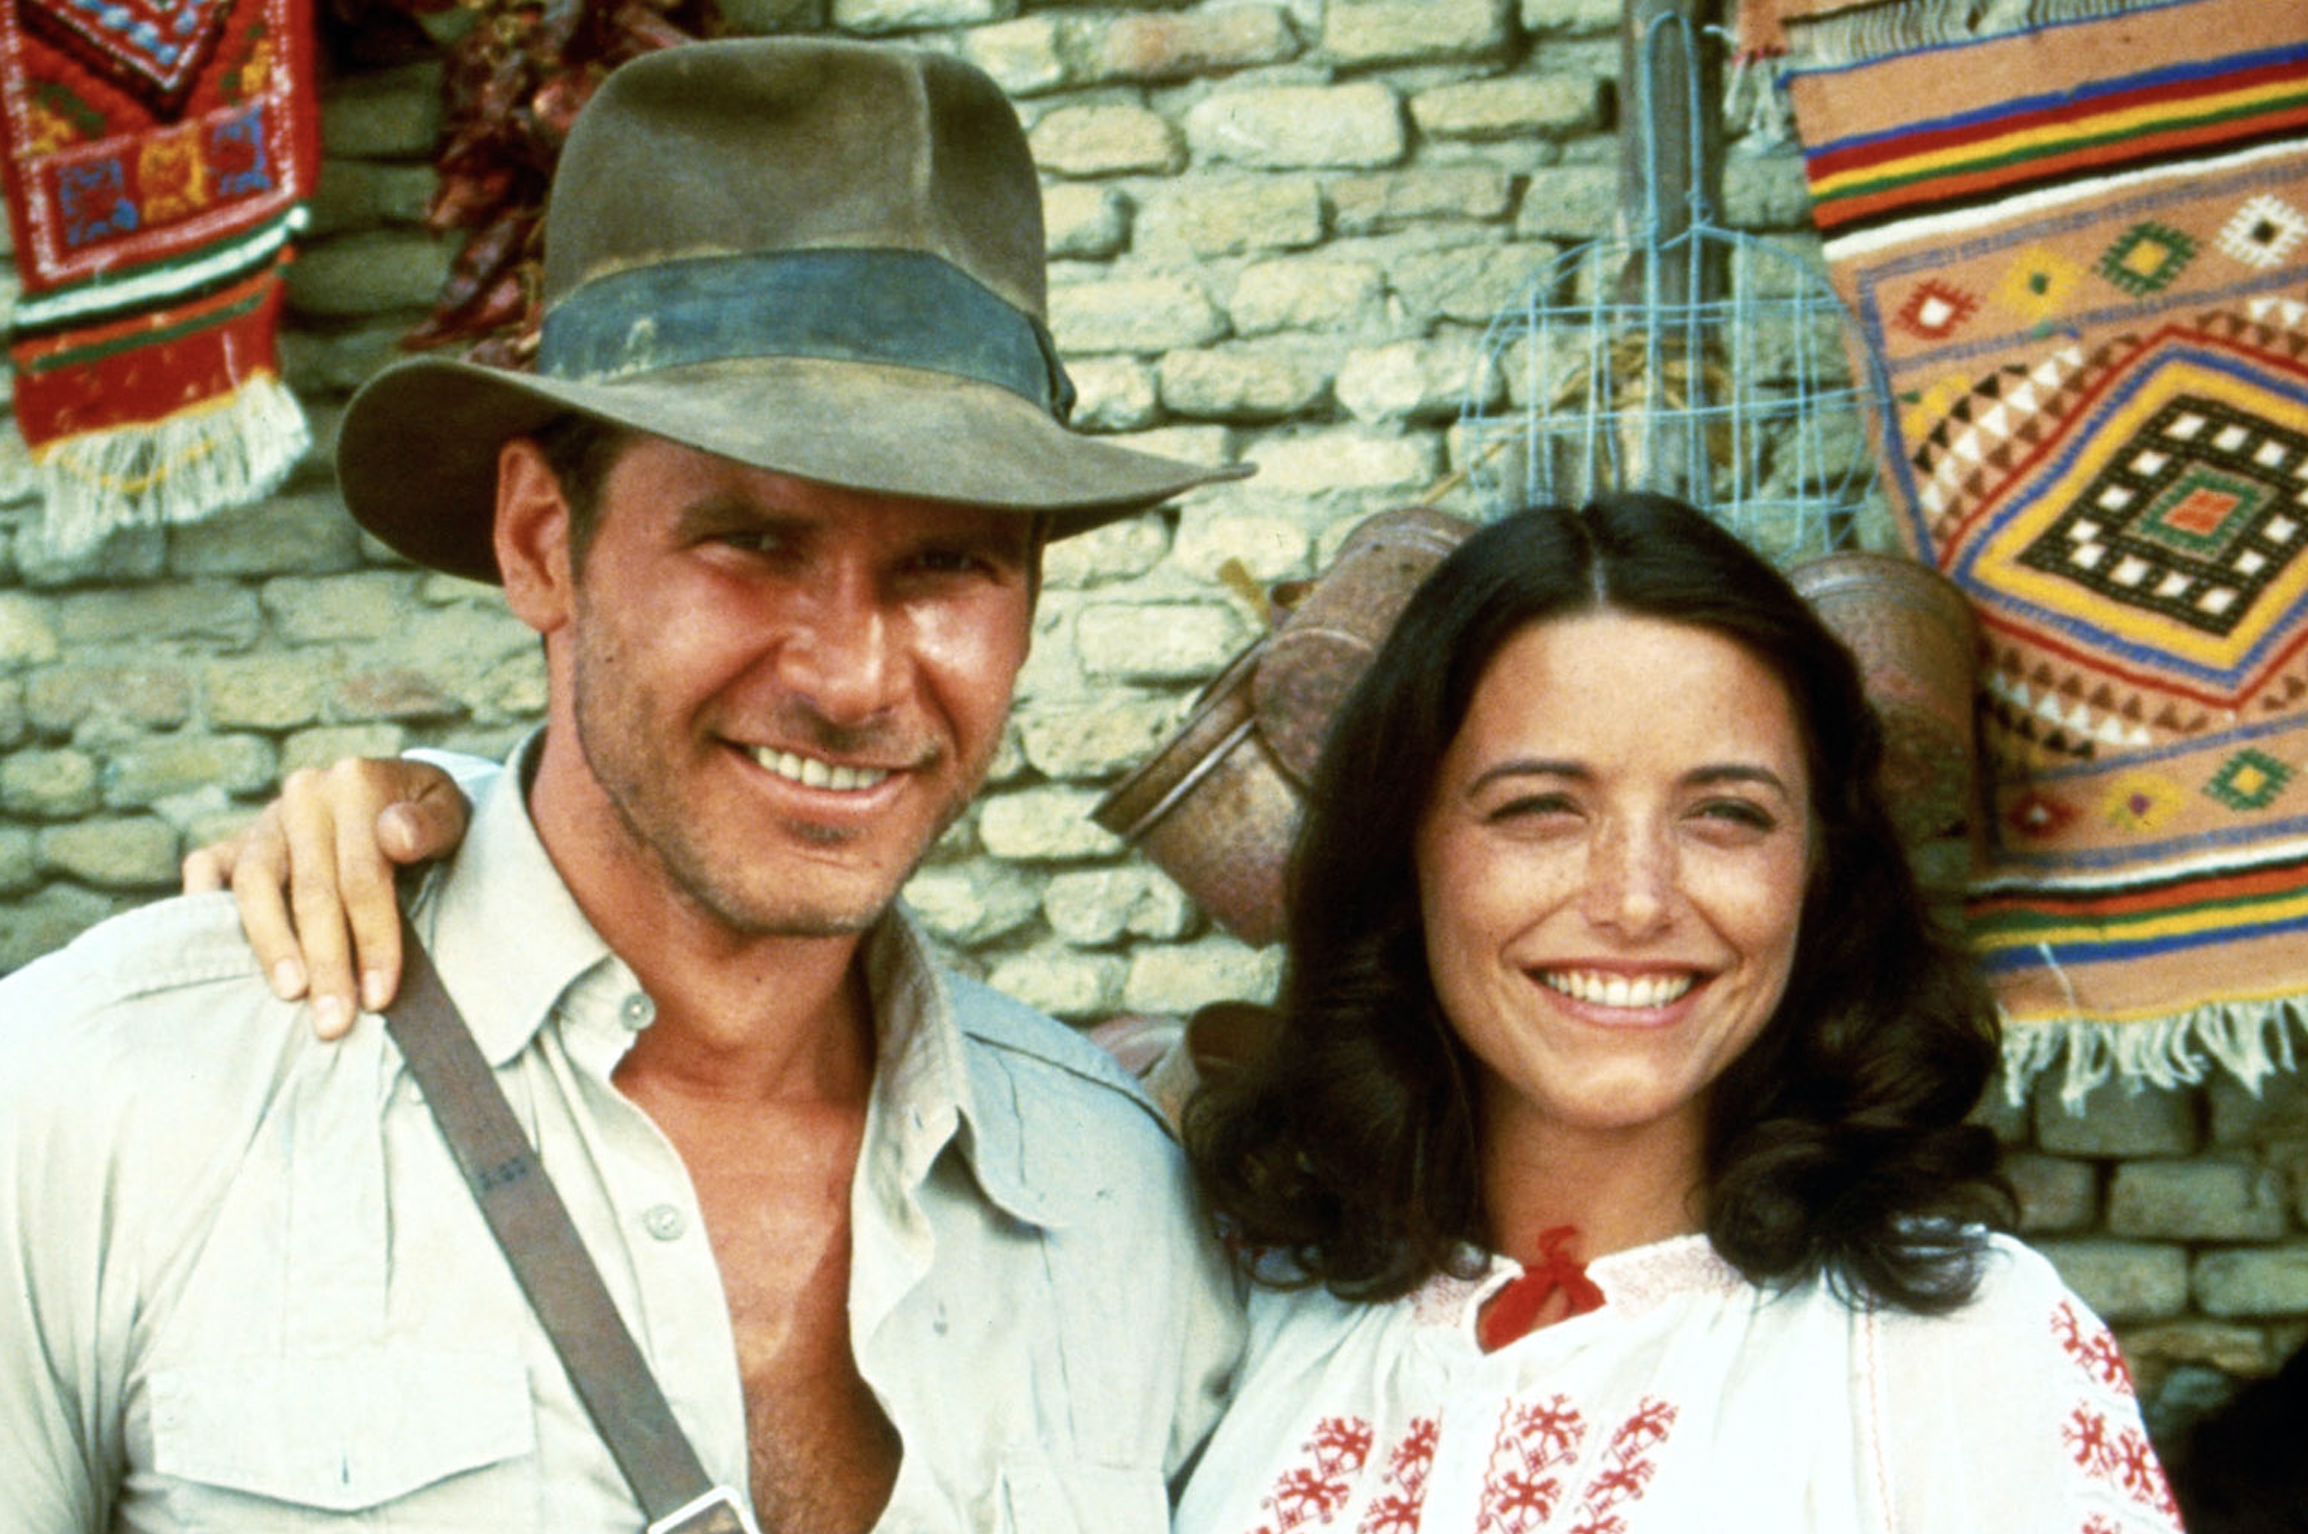 Harrison Ford and Karen Allen for Raiders of the Lost Ark. Courtesy of Lucasfilm.